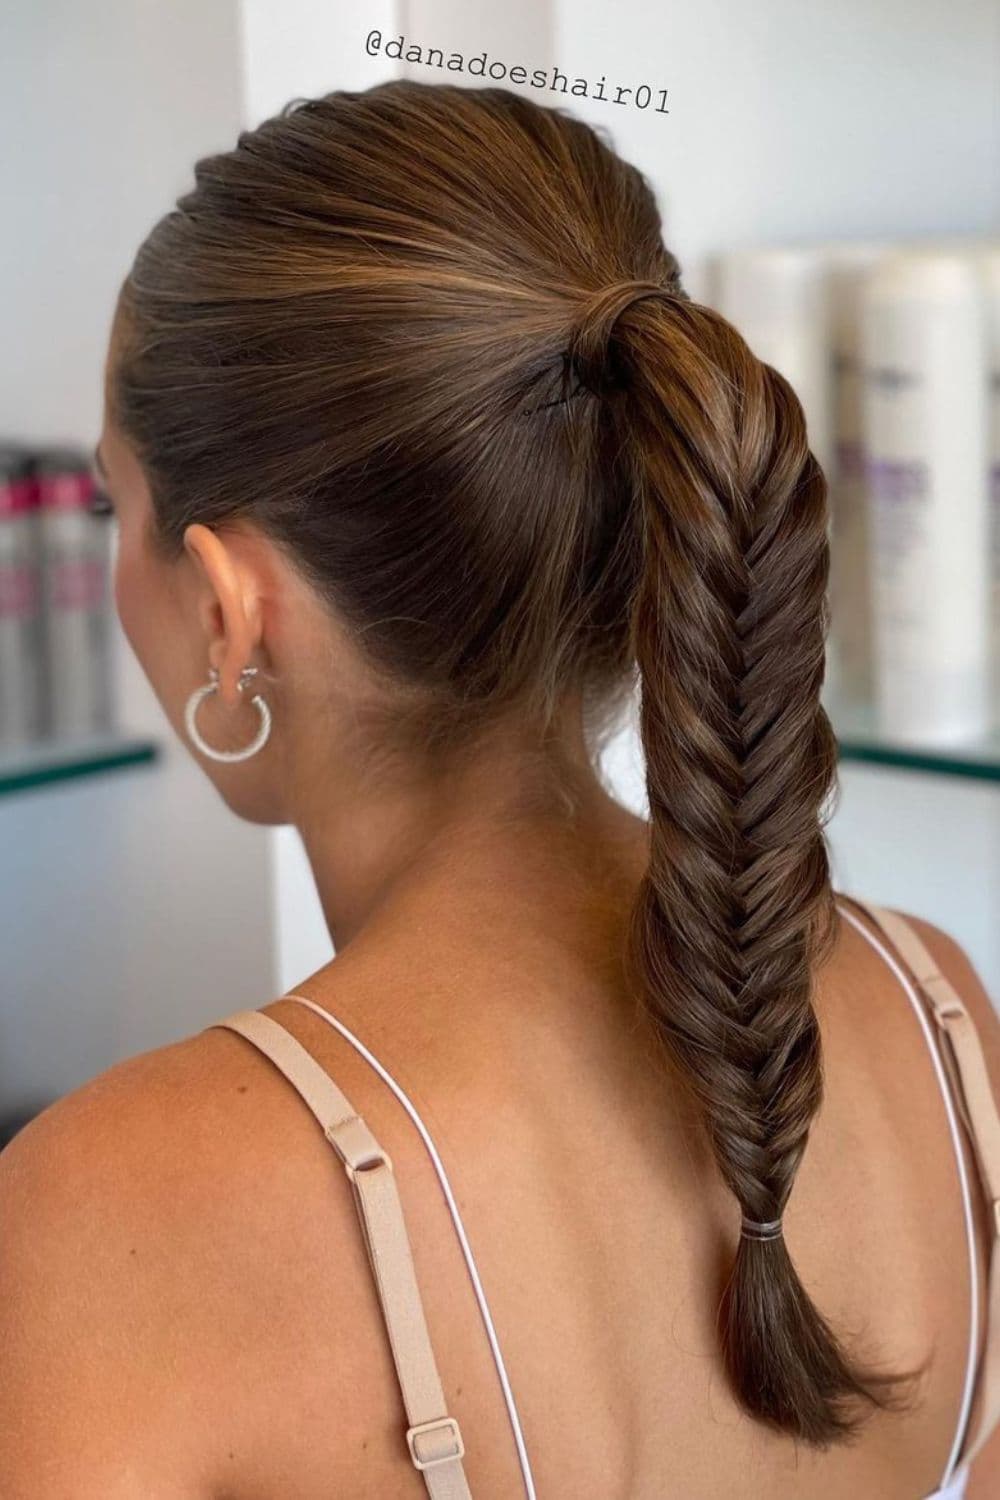 A woman with a brown fishtail braid.